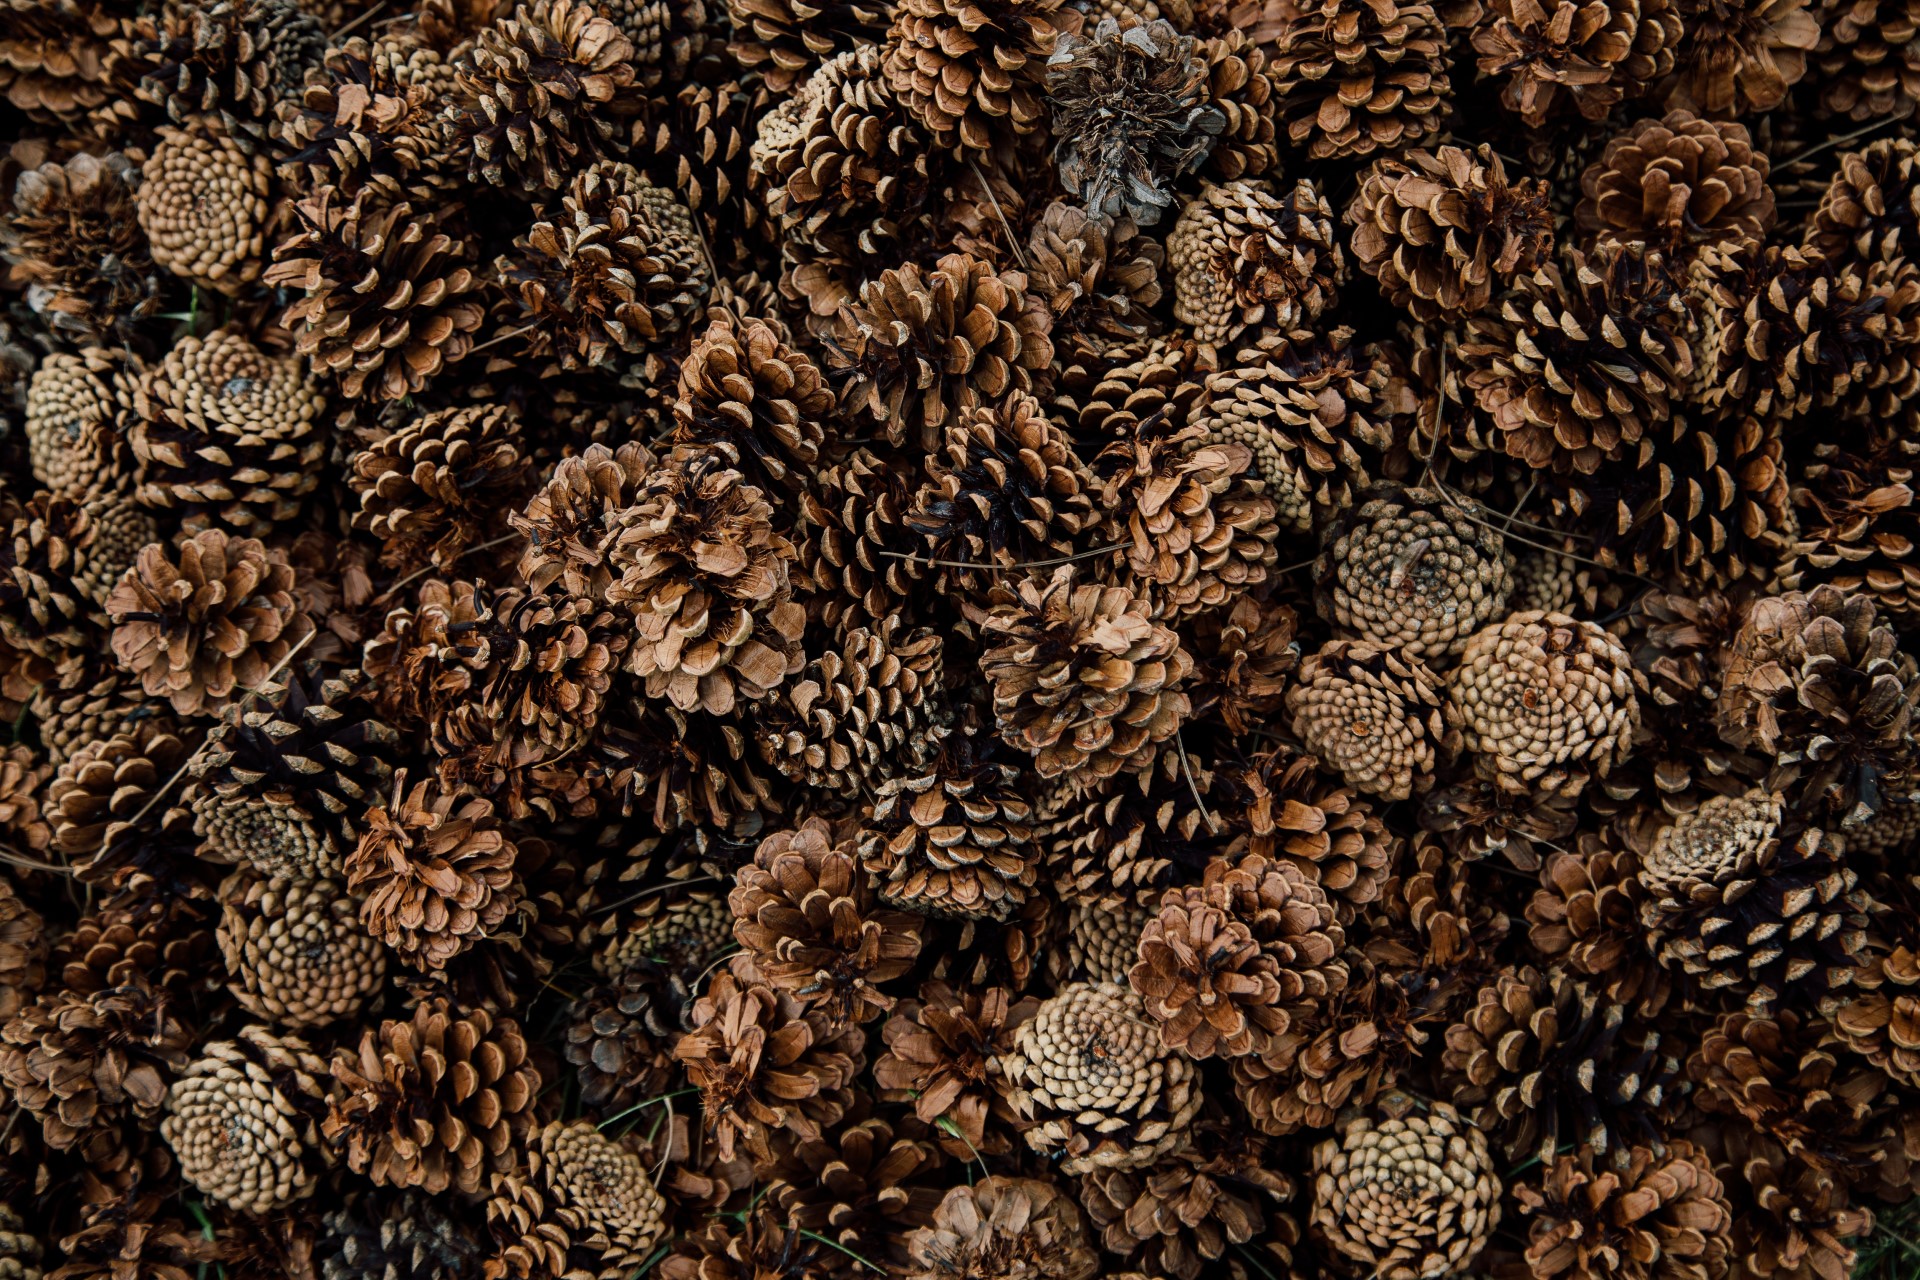 A group of pinecones packed together